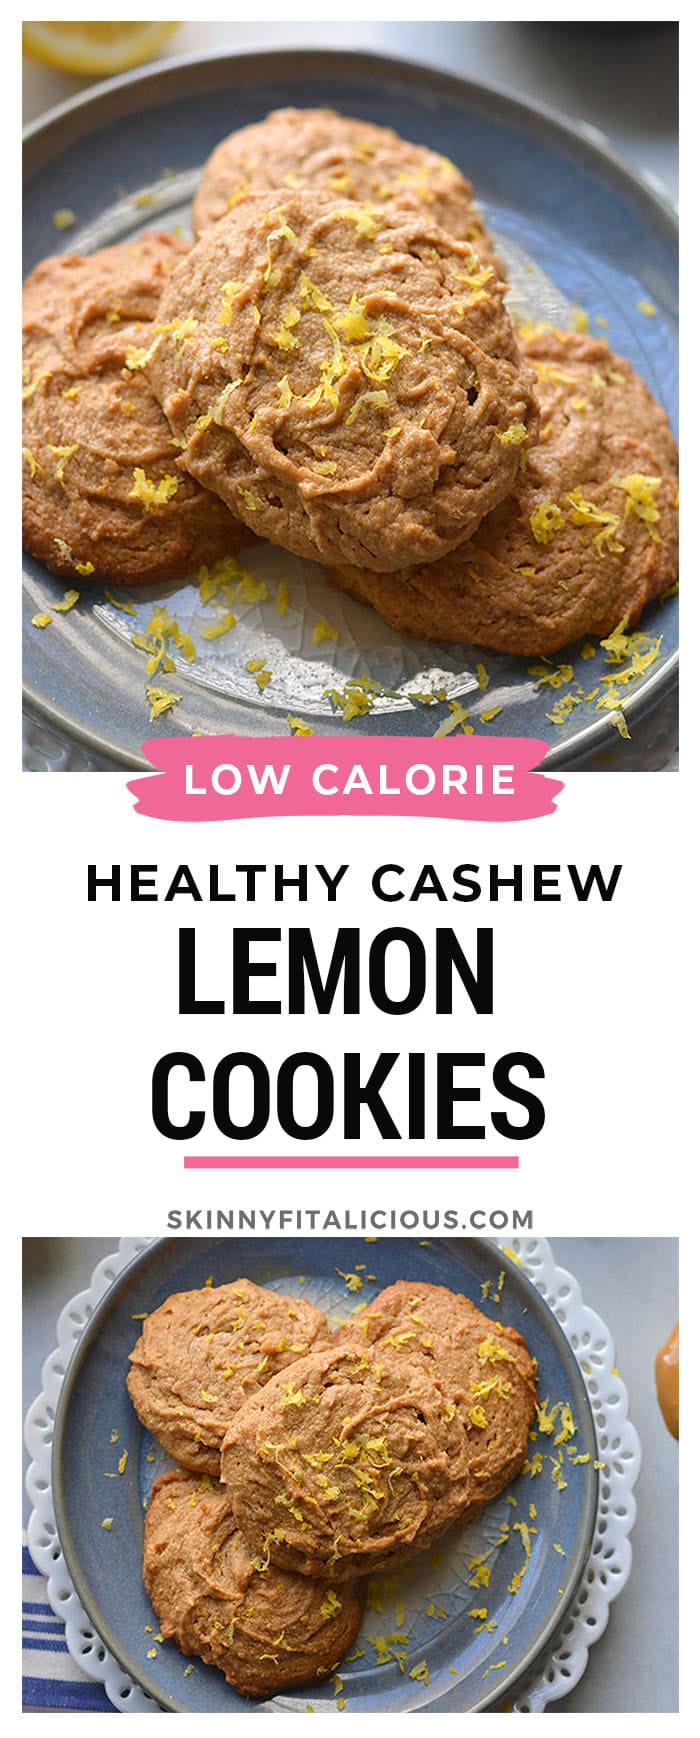 Healthy Lemon Cashew Cookies made grain free with 5 ingredients. These healthy cookies are lower in calories and lower in sugar.